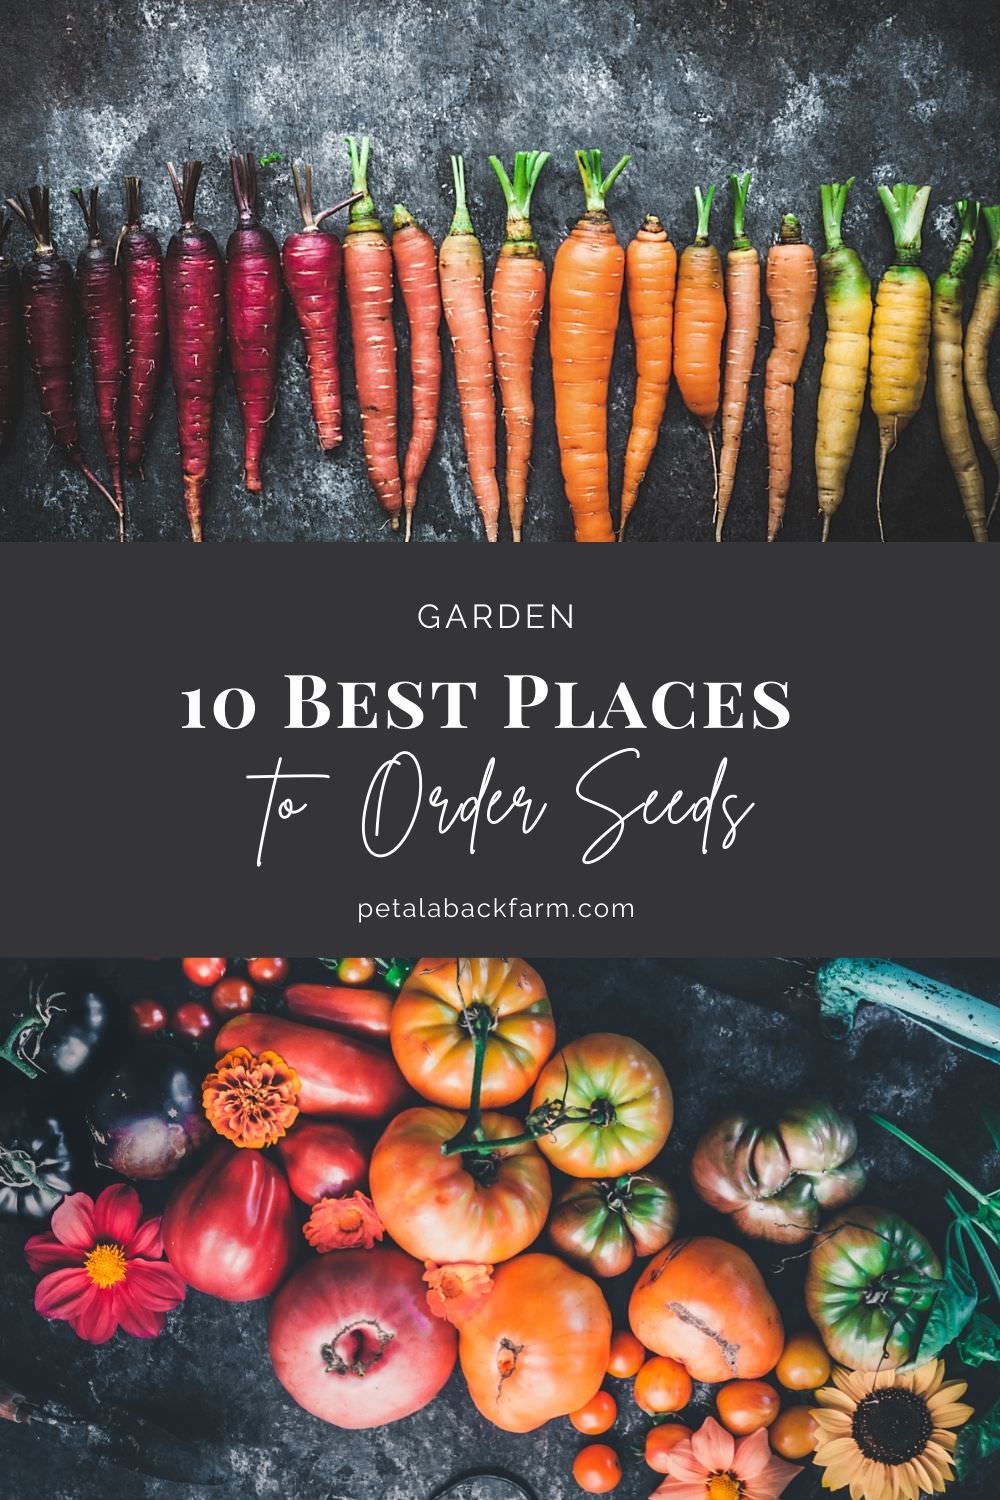 10 Best Places to Order Seeds